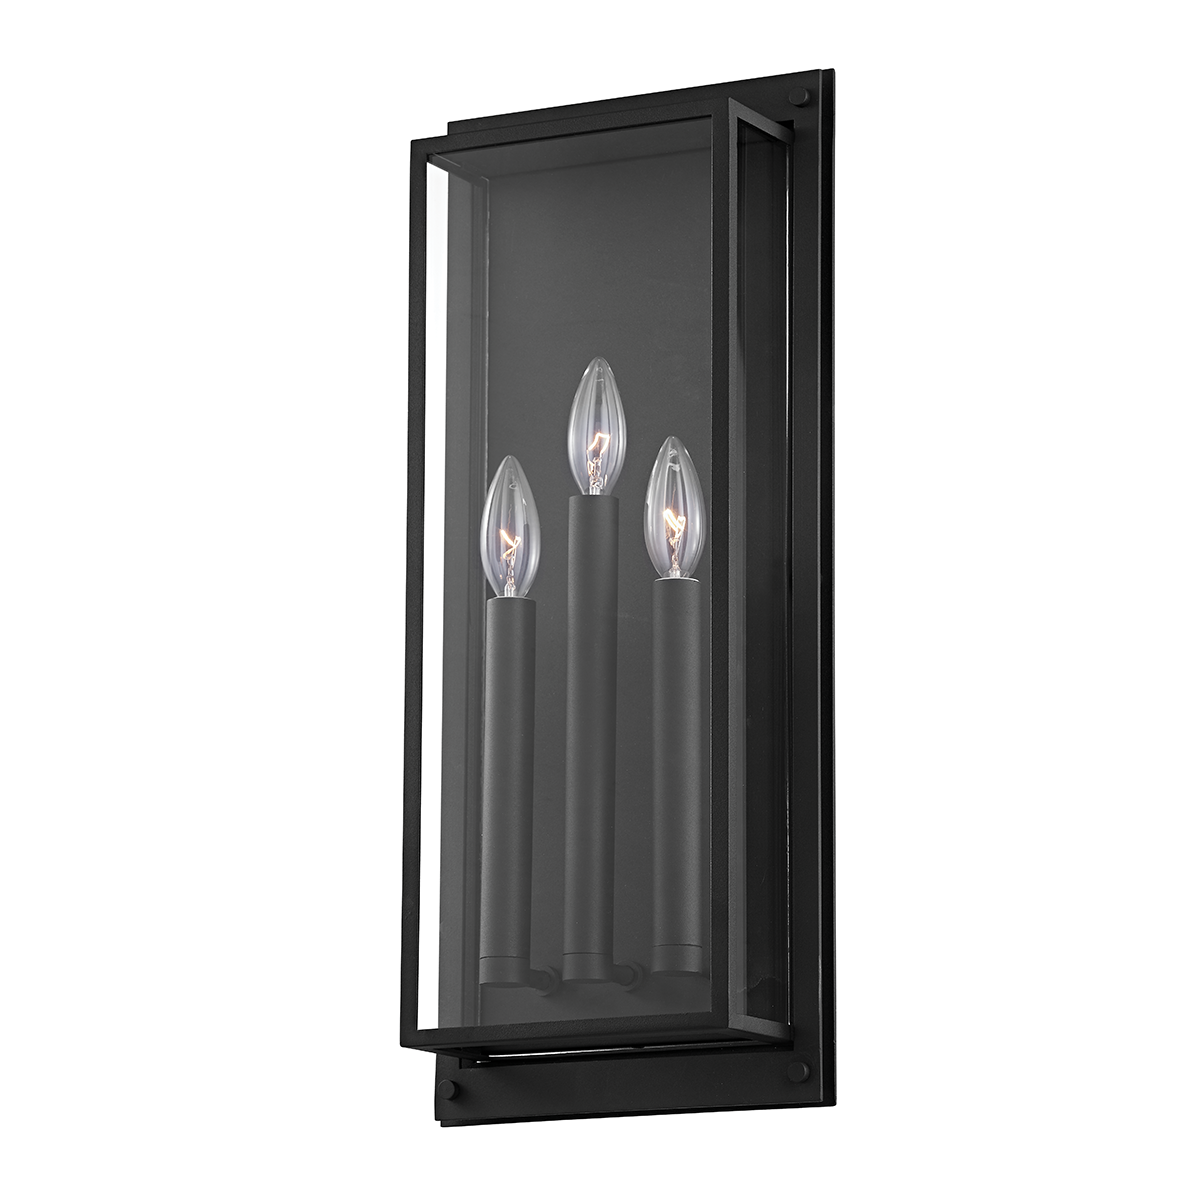 Troy Lighting 1 LIGHT LARGE EXTERIOR WALL SCONCE B9103